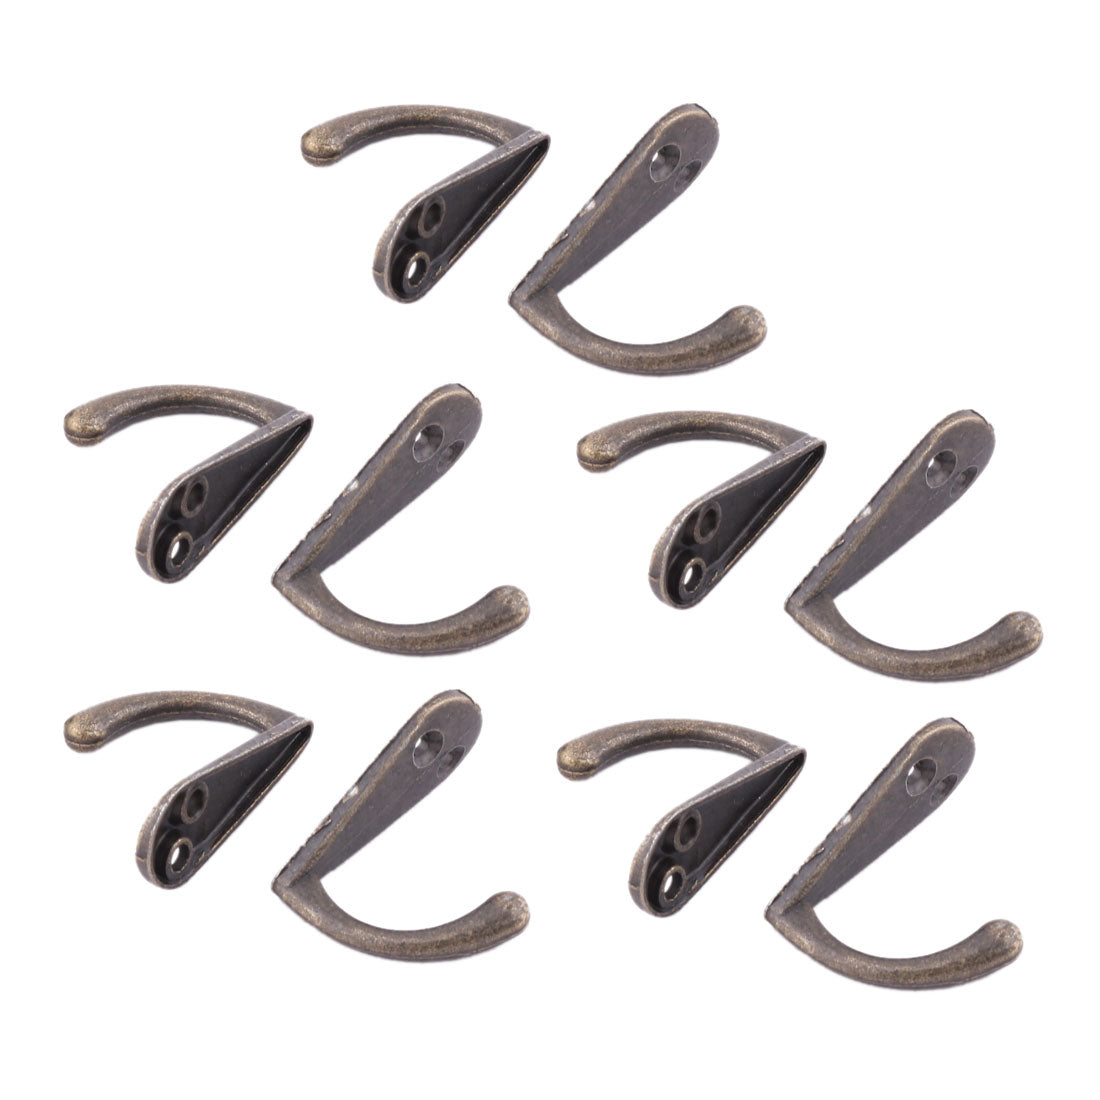 uxcell Uxcell Home Vintage Style Wall Mounted Towel Scarf Bag Cap Hook Hangers Bronze Tone 10 Pcs